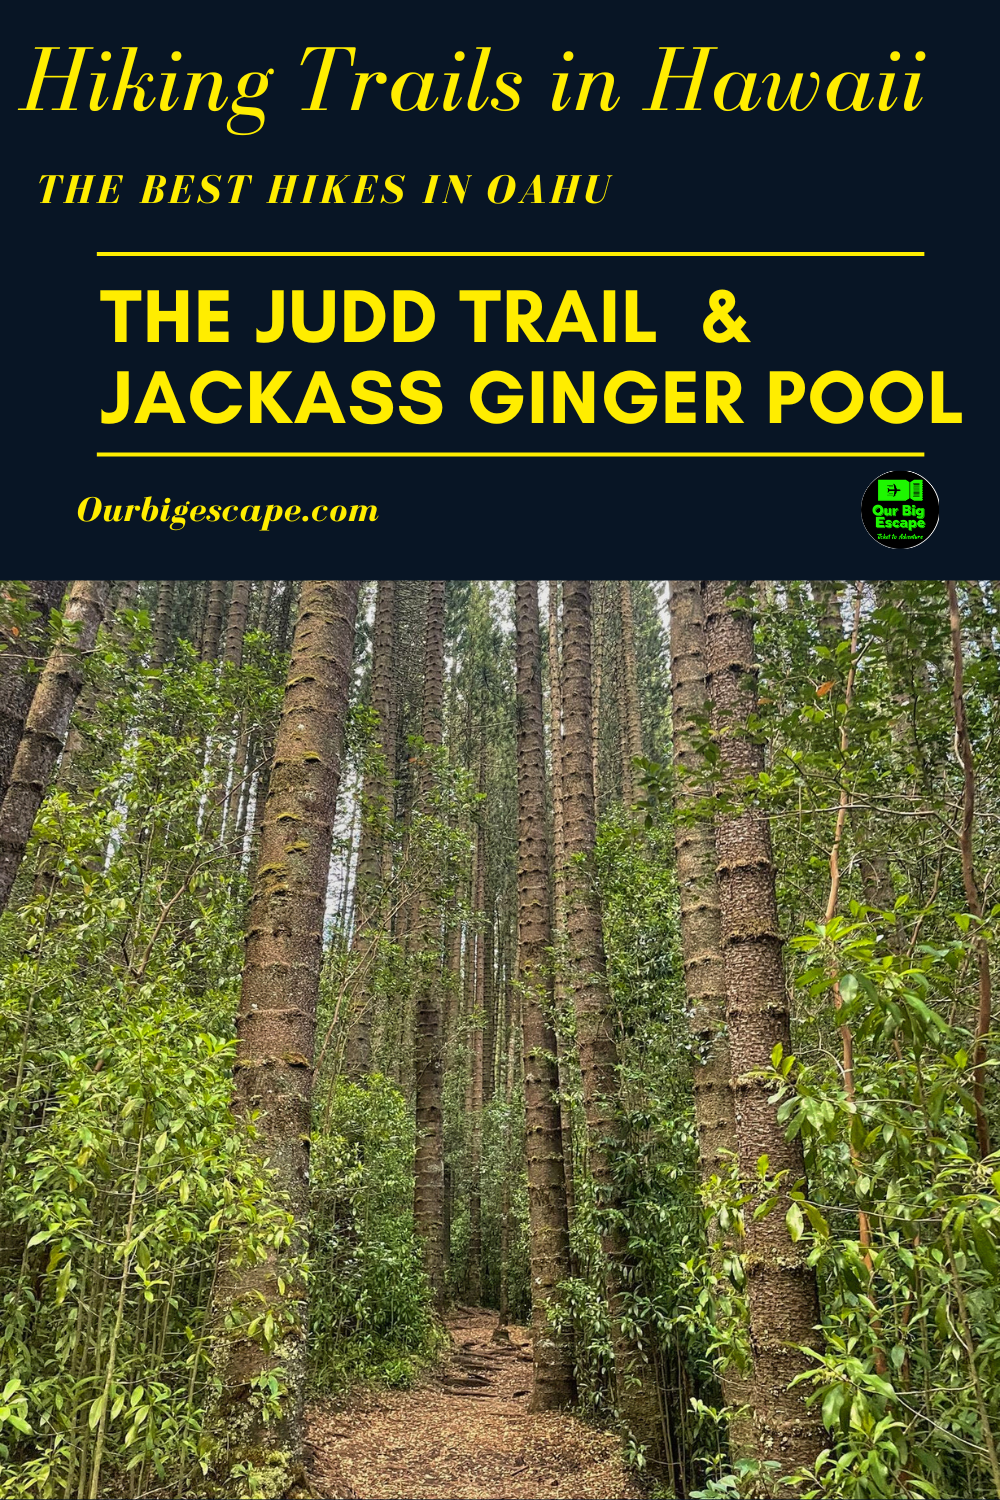 Hiking Trails in Hawaii - The Judd Trail & Jackass Ginger Pool